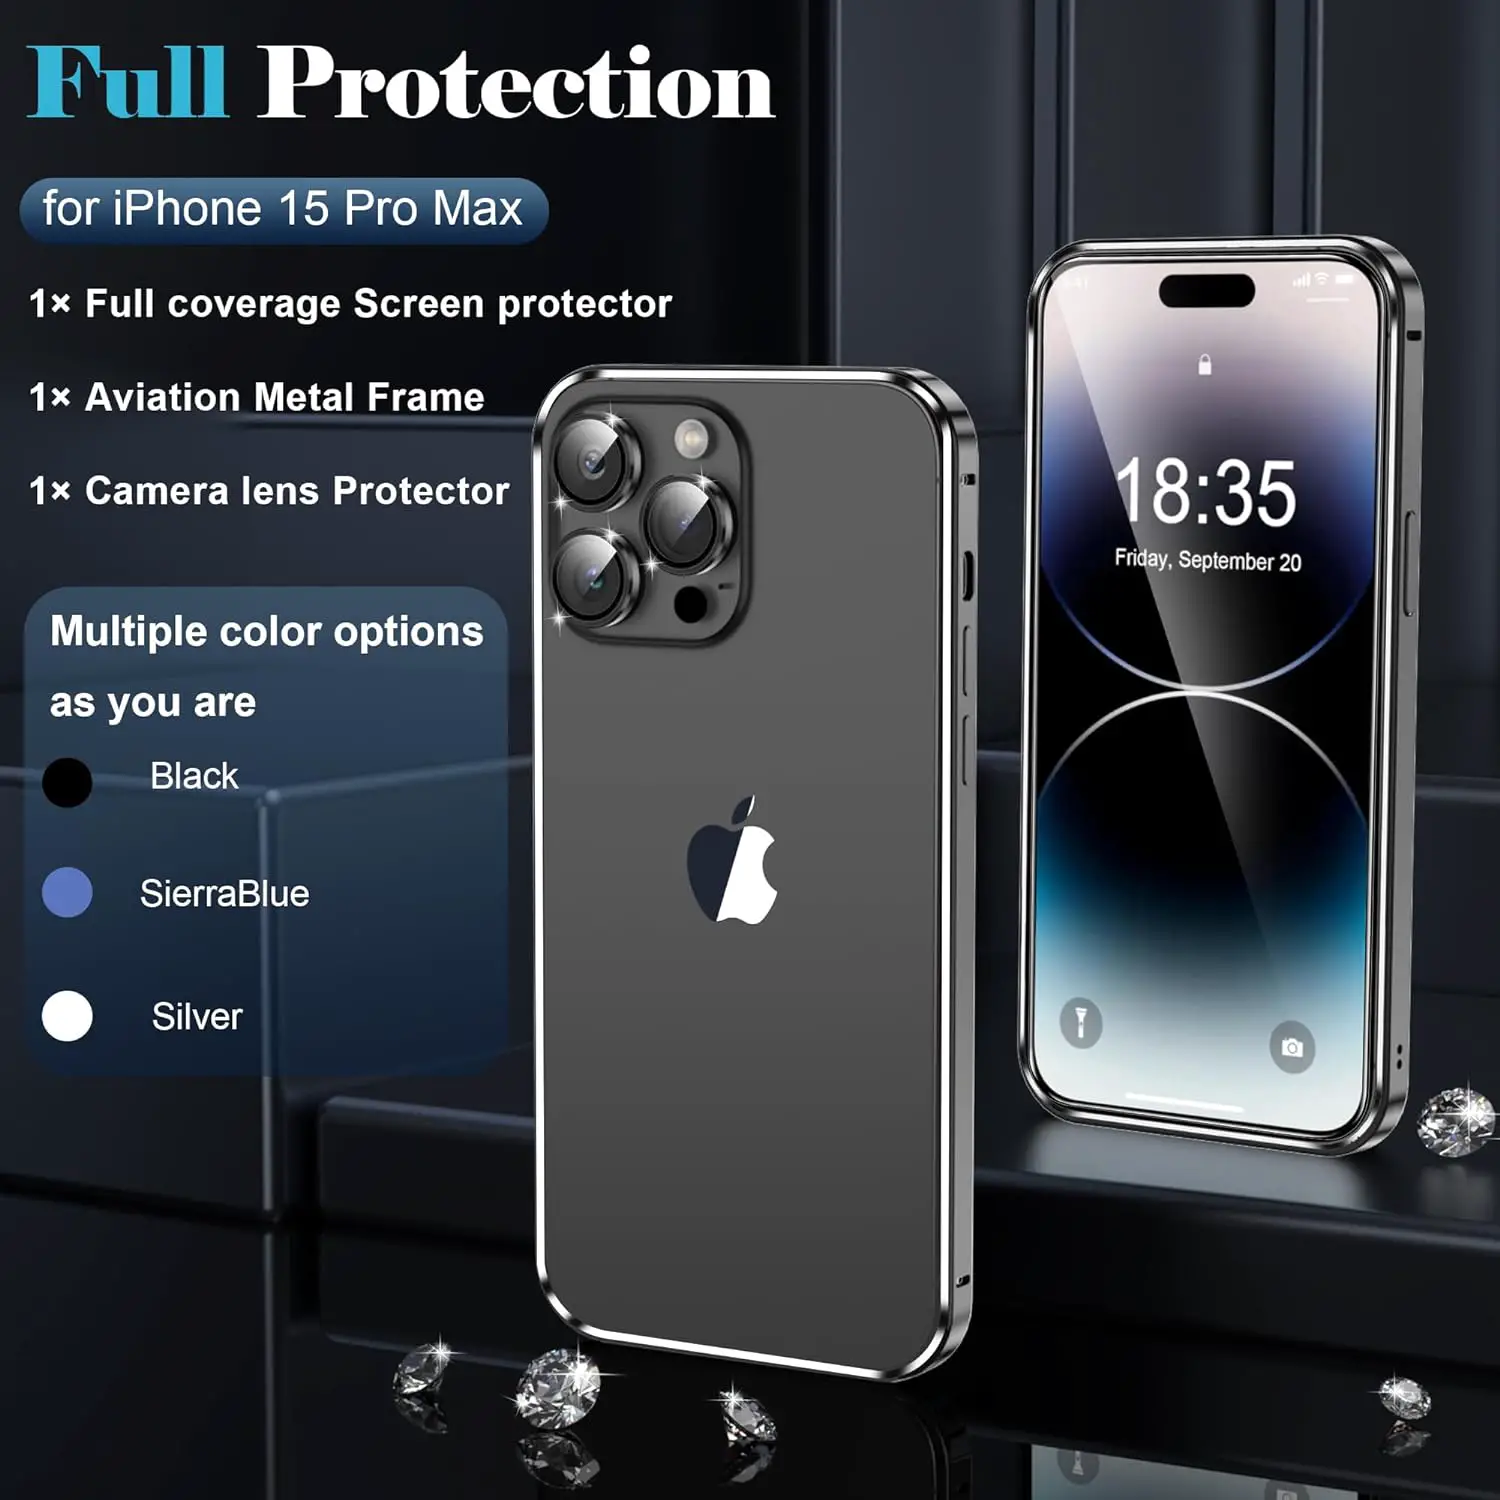 YMHML 3 in 1 Case for iPhone 15 Pro Max Titanium Frame with Screen Protector and Camera Lens Protector Tempered Glass, Metal Bumper Slim Hard Straight Edge Full Drop Protection Accessories, Black